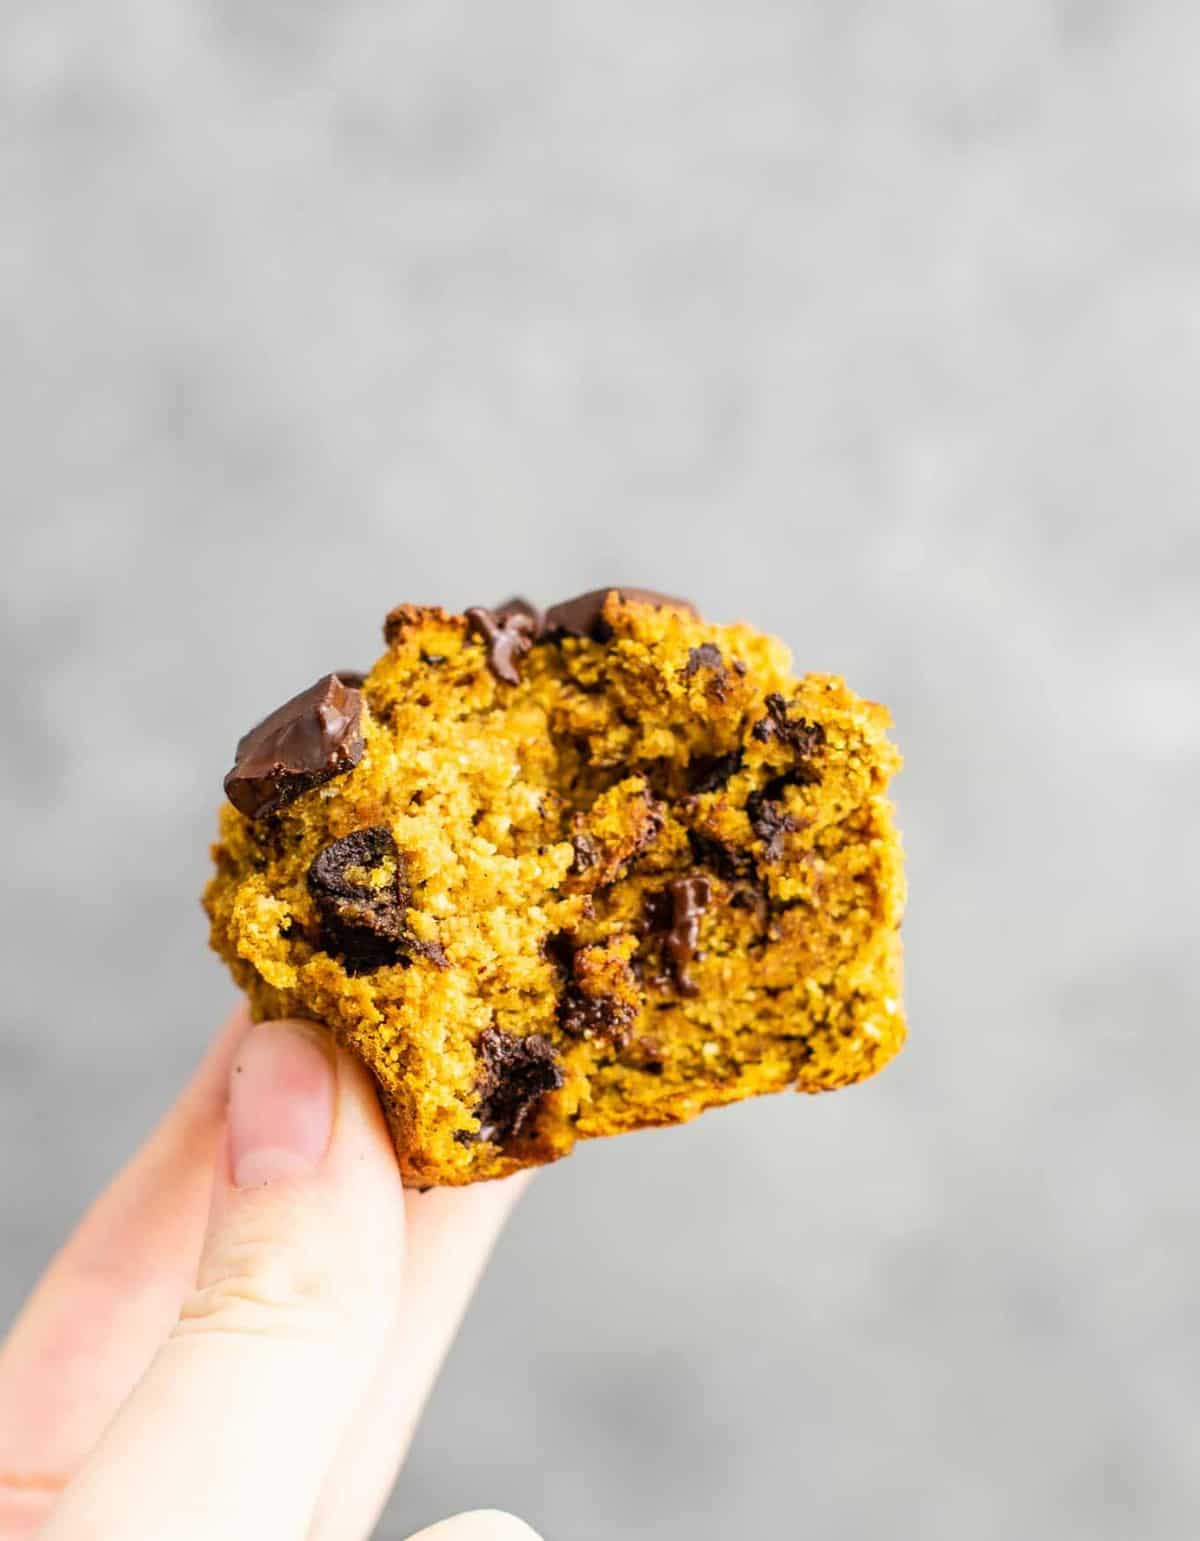 Gluten free pumpkin muffins with dark chocolate chips – these are AMAZING! And they don’t fall apart like a lot of gluten free stuff (they use oat flour and coconut flour) #glutenfree #pumpkinmuffins #pumpkinrecipes #healthyrecipes #muffins #healthymuffins #glutenfreemuffins